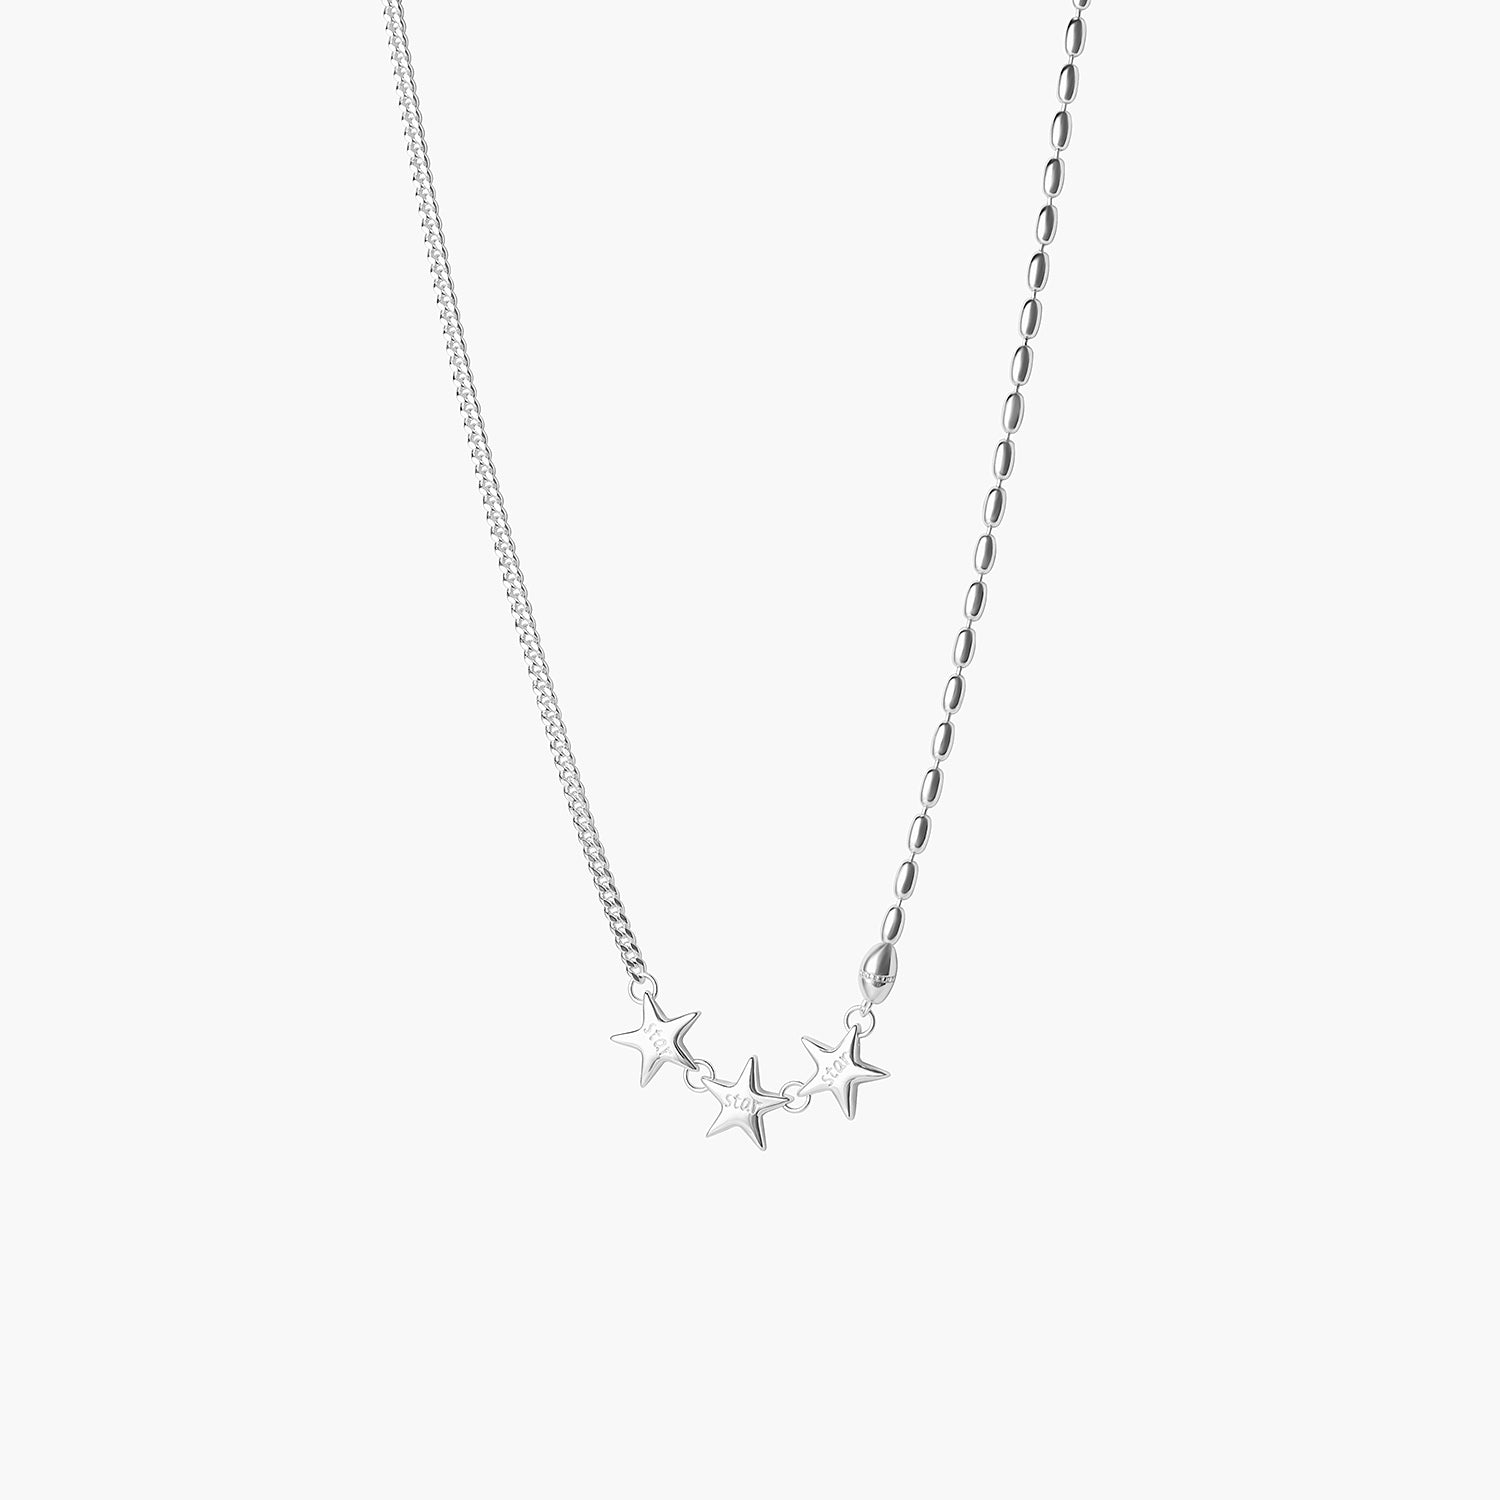 Star Charm Beaded Chain Necklace